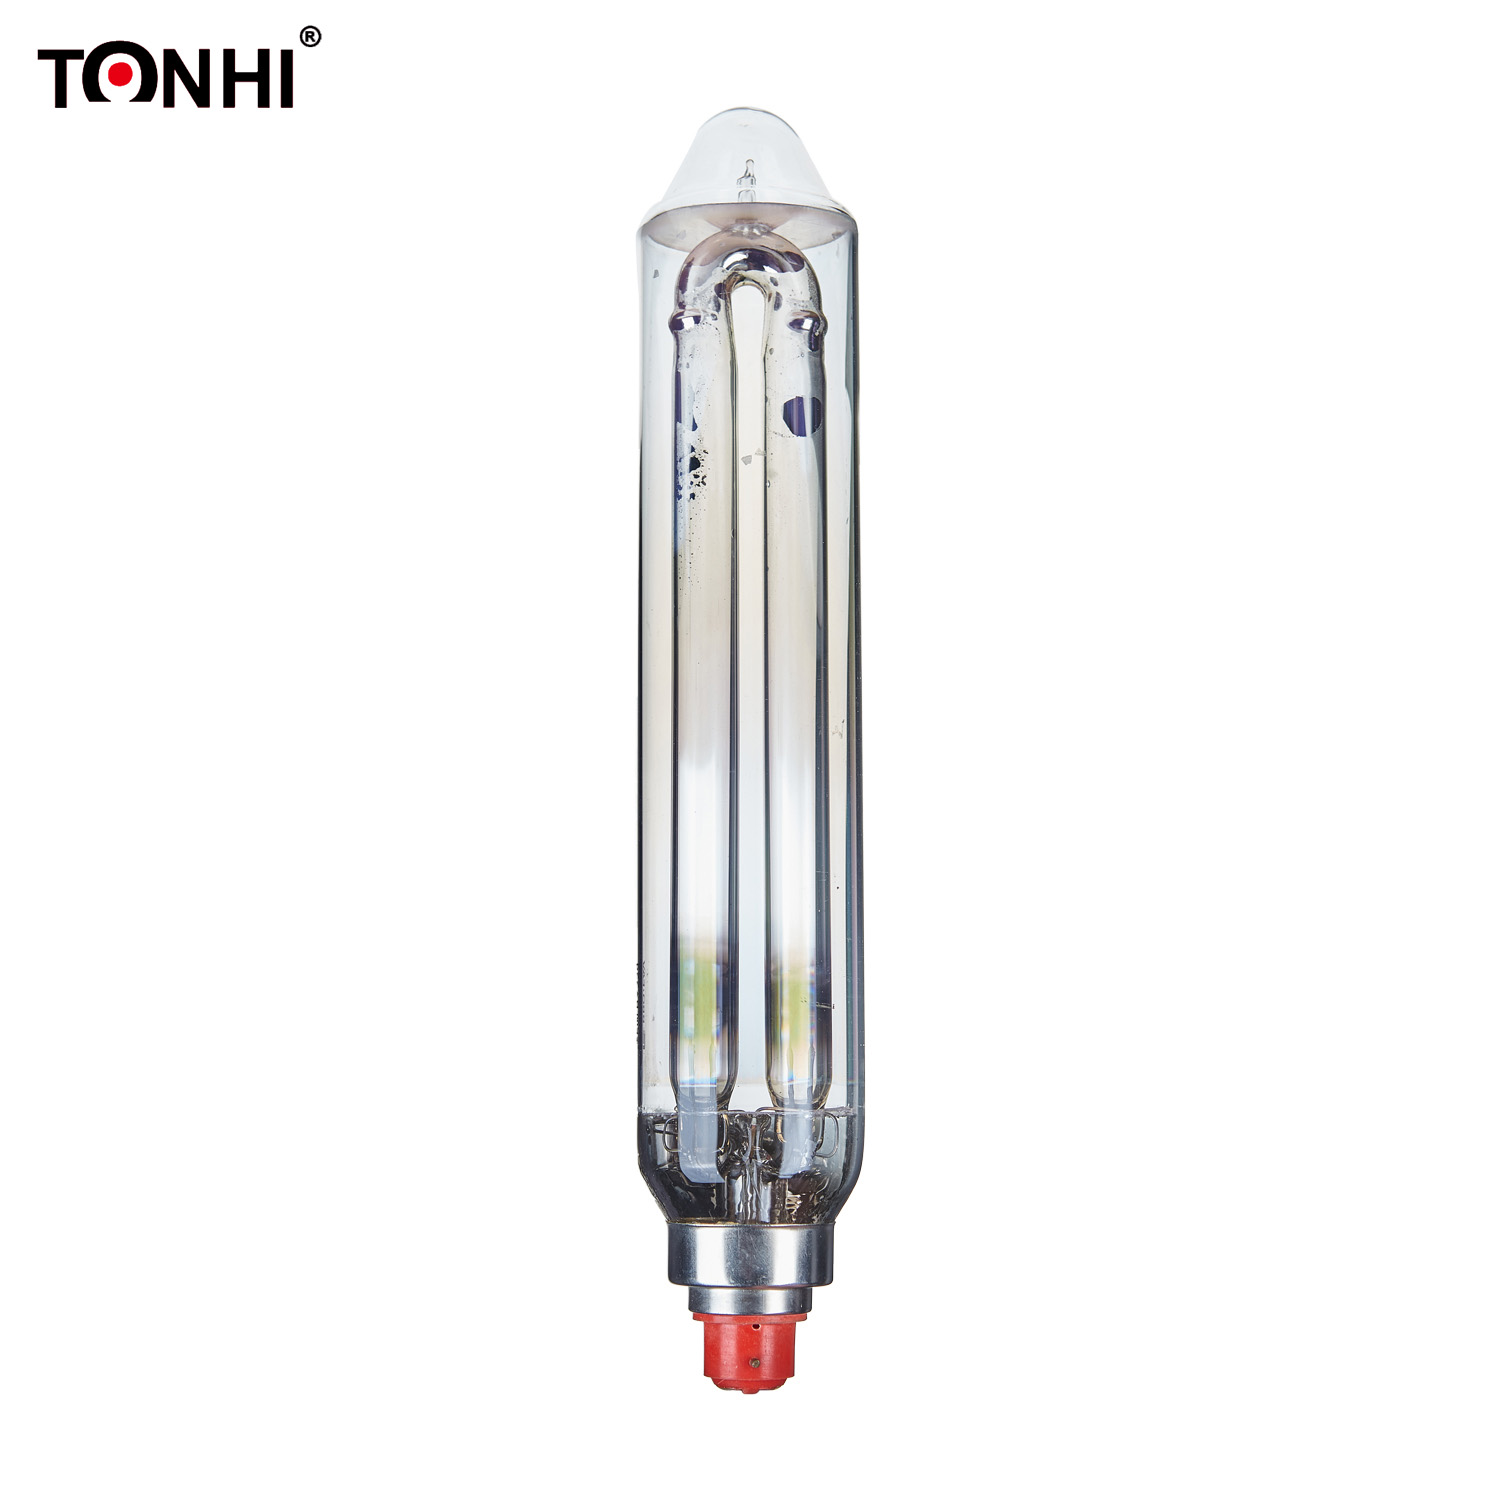 SOX-E 36W BY22d low pressure sodium Lamp